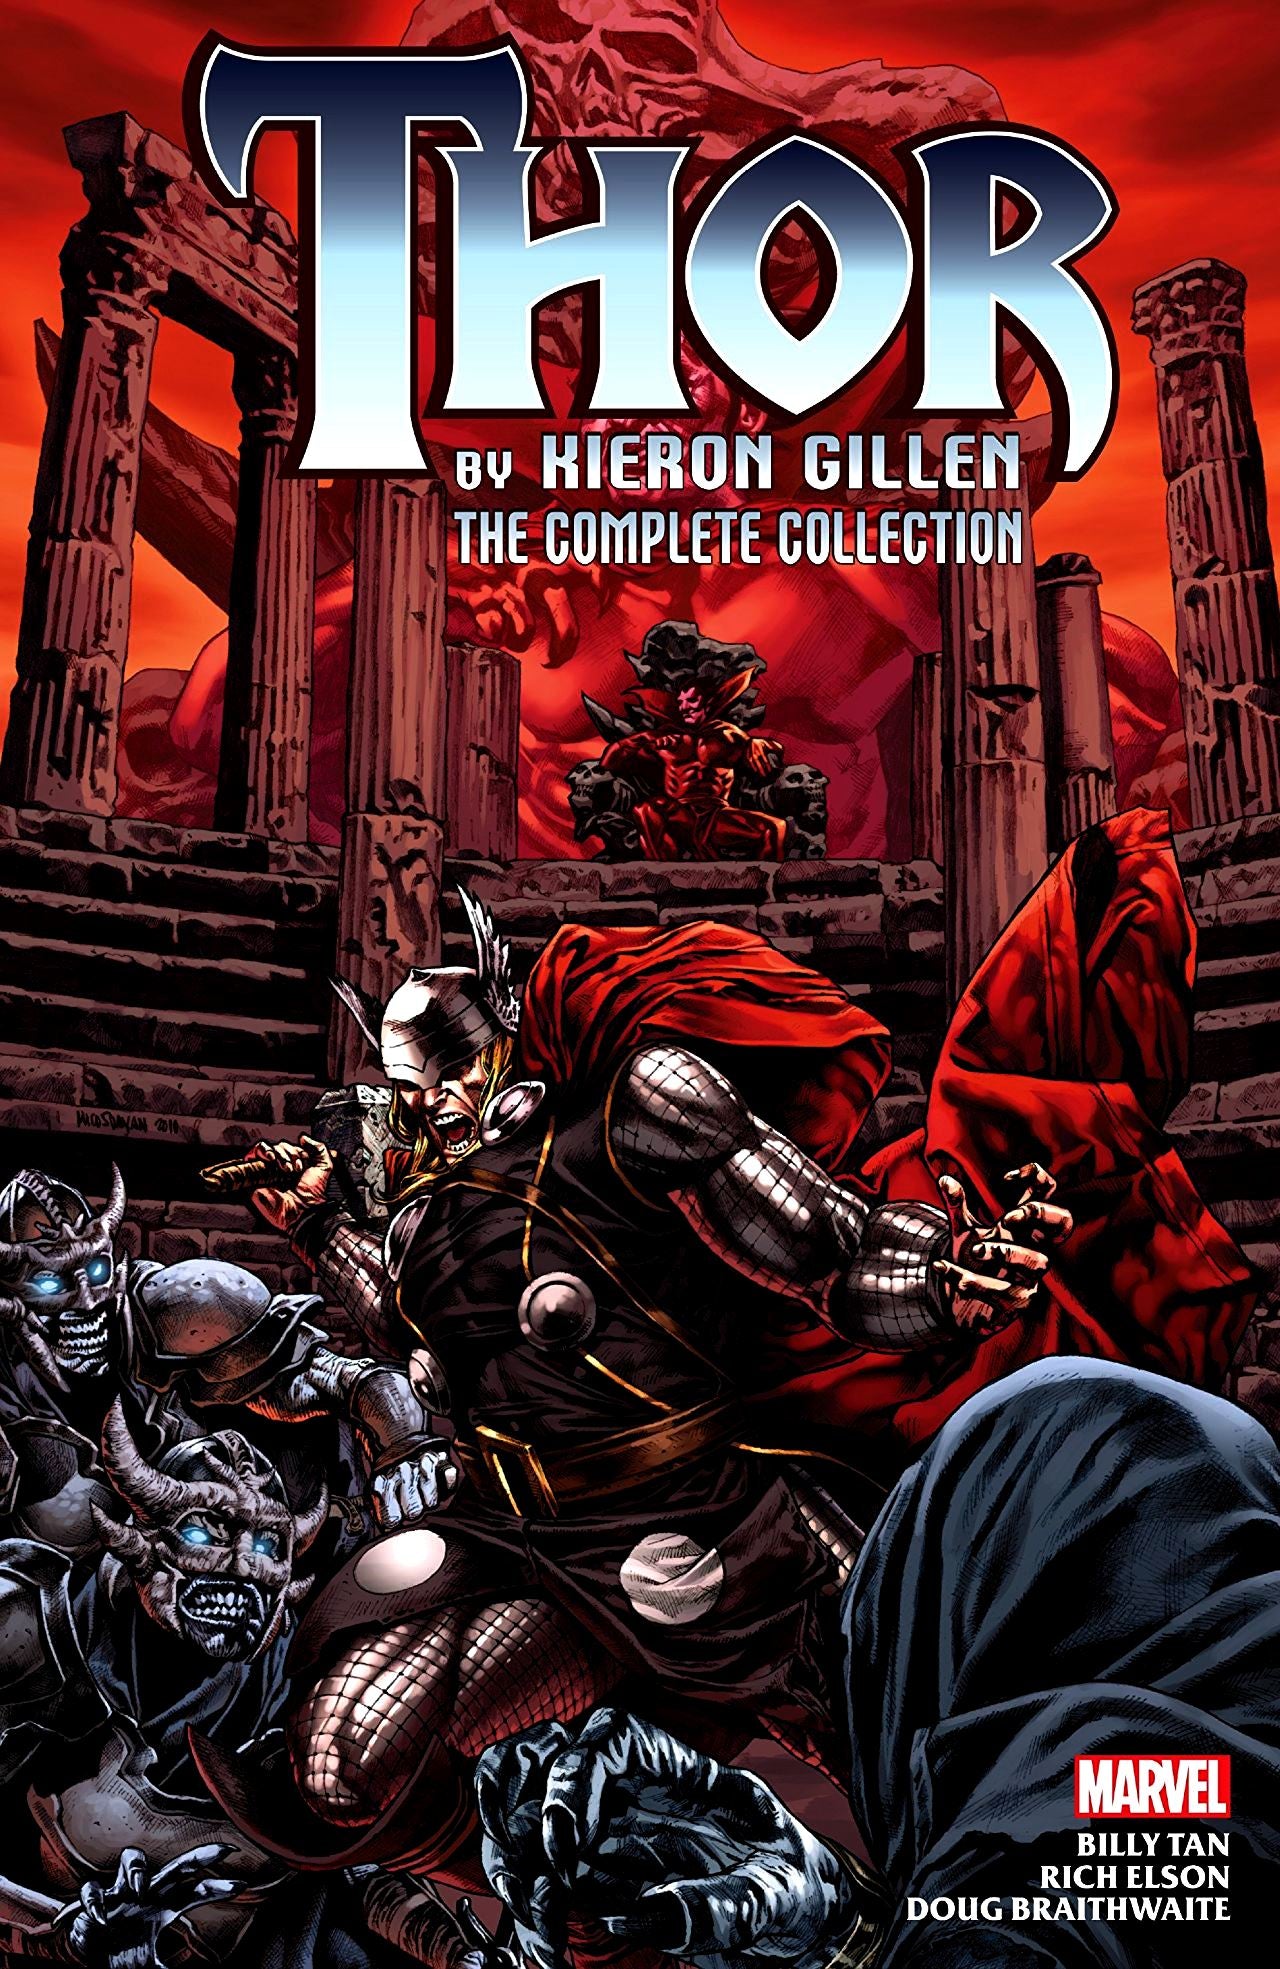 Thor by Kieron Gillen - The Complete Collection